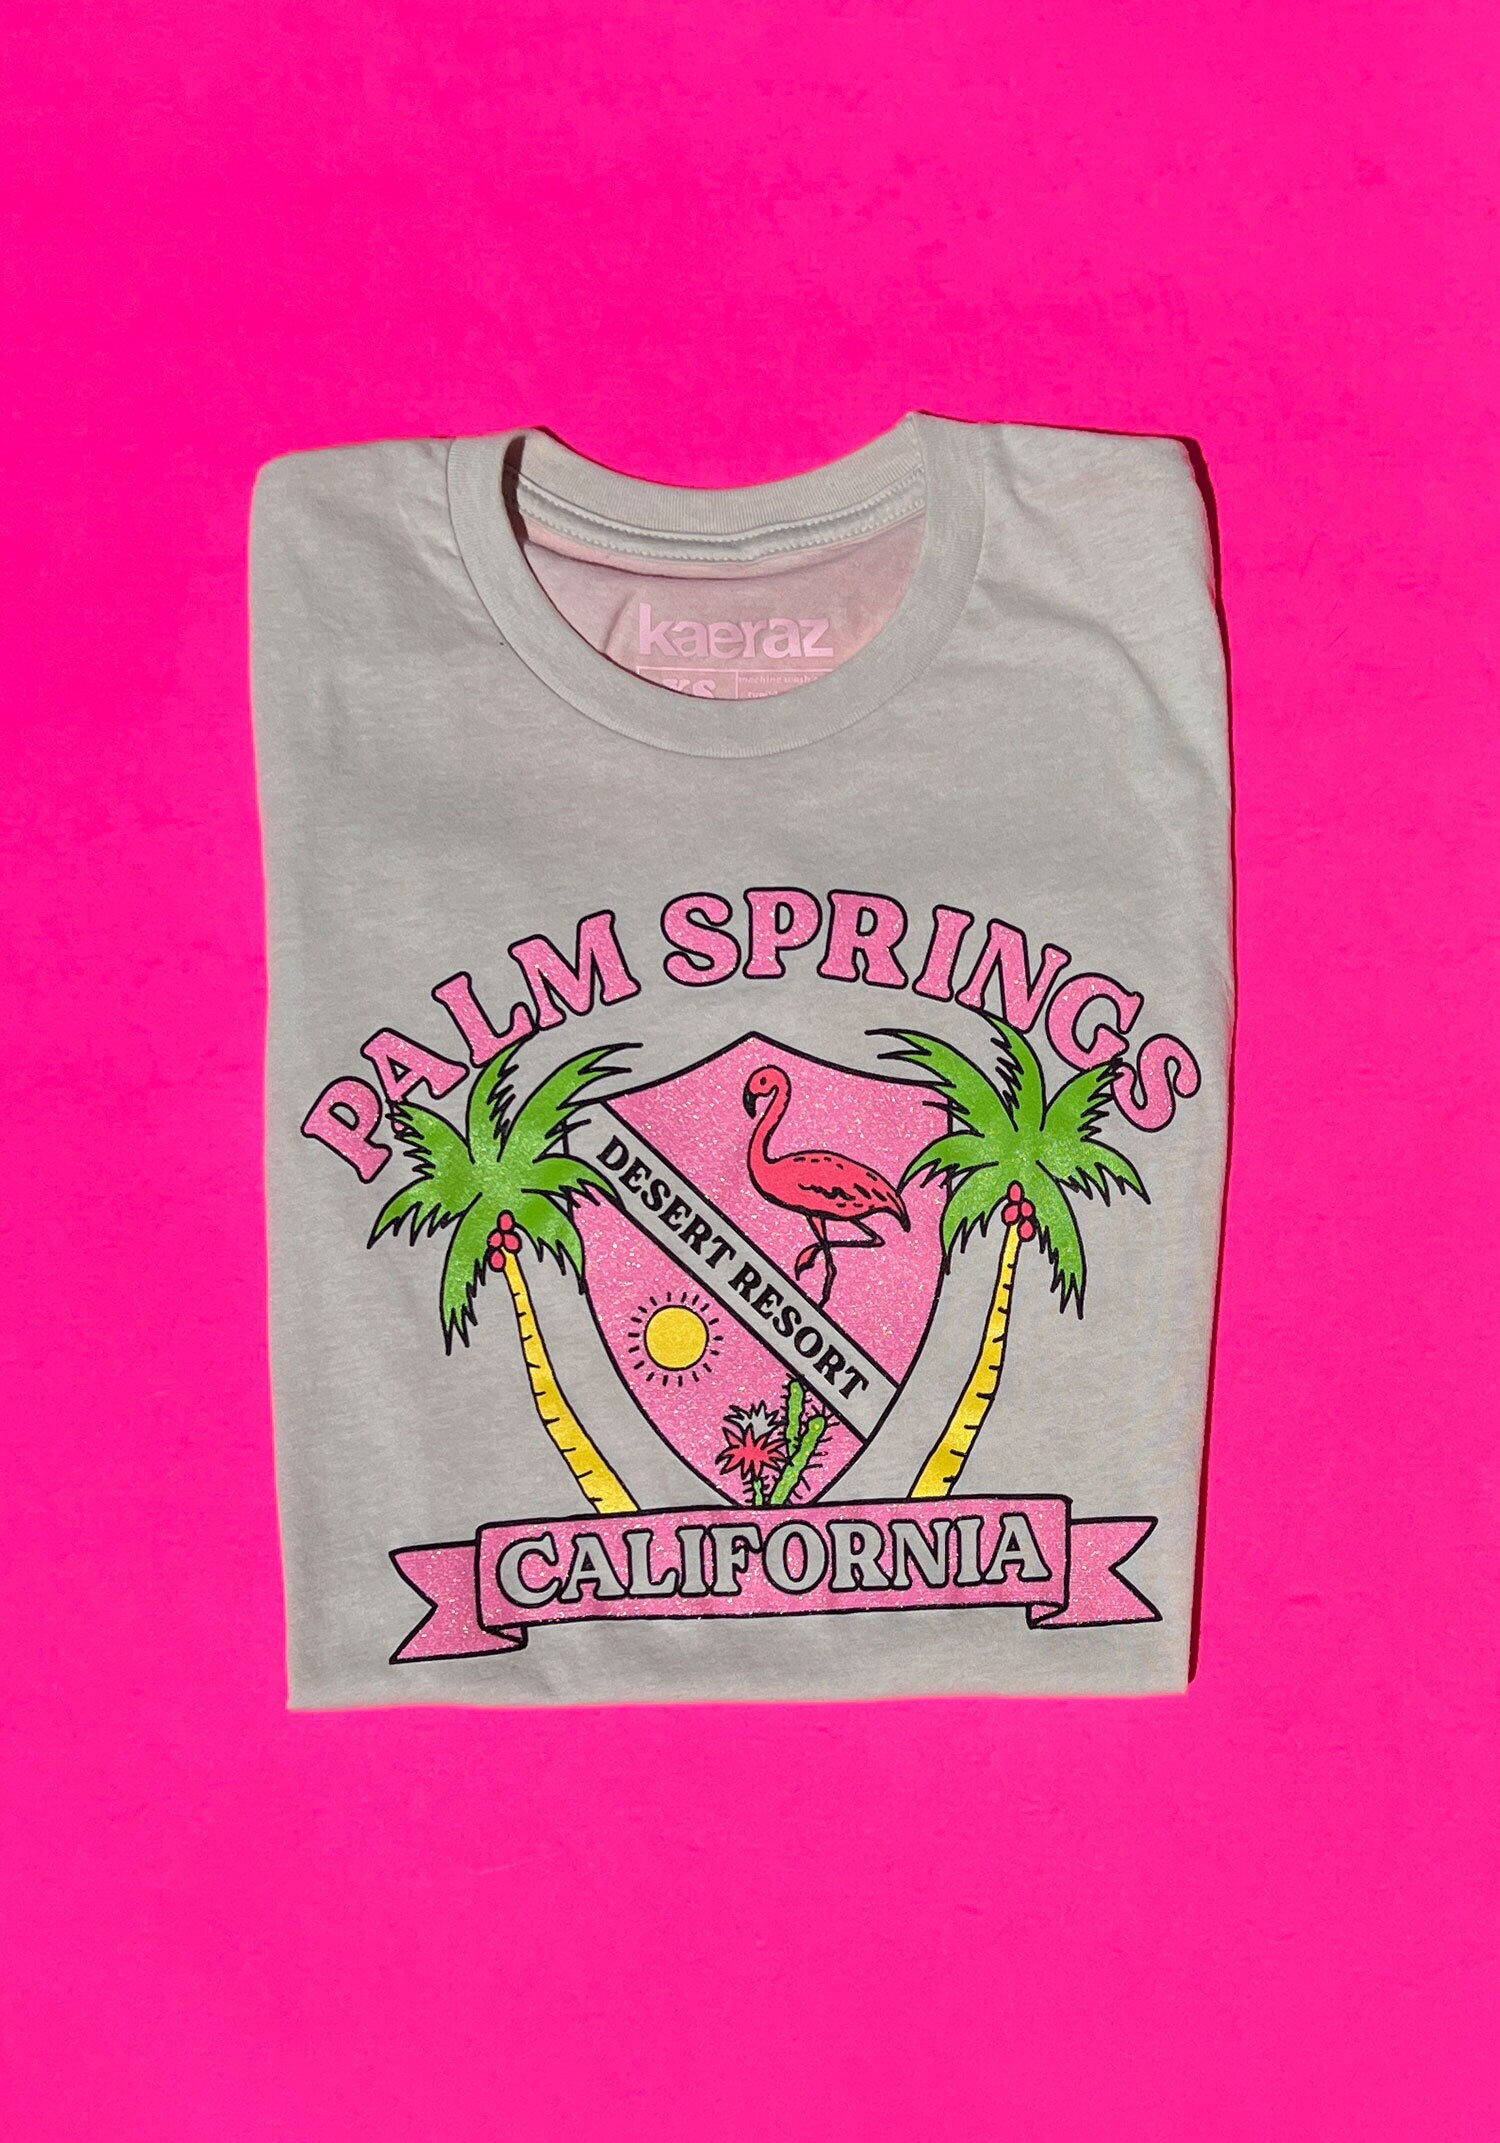 Palm Springs Glitter Tee Palm Springs Shirts Palm Springs - Etsy